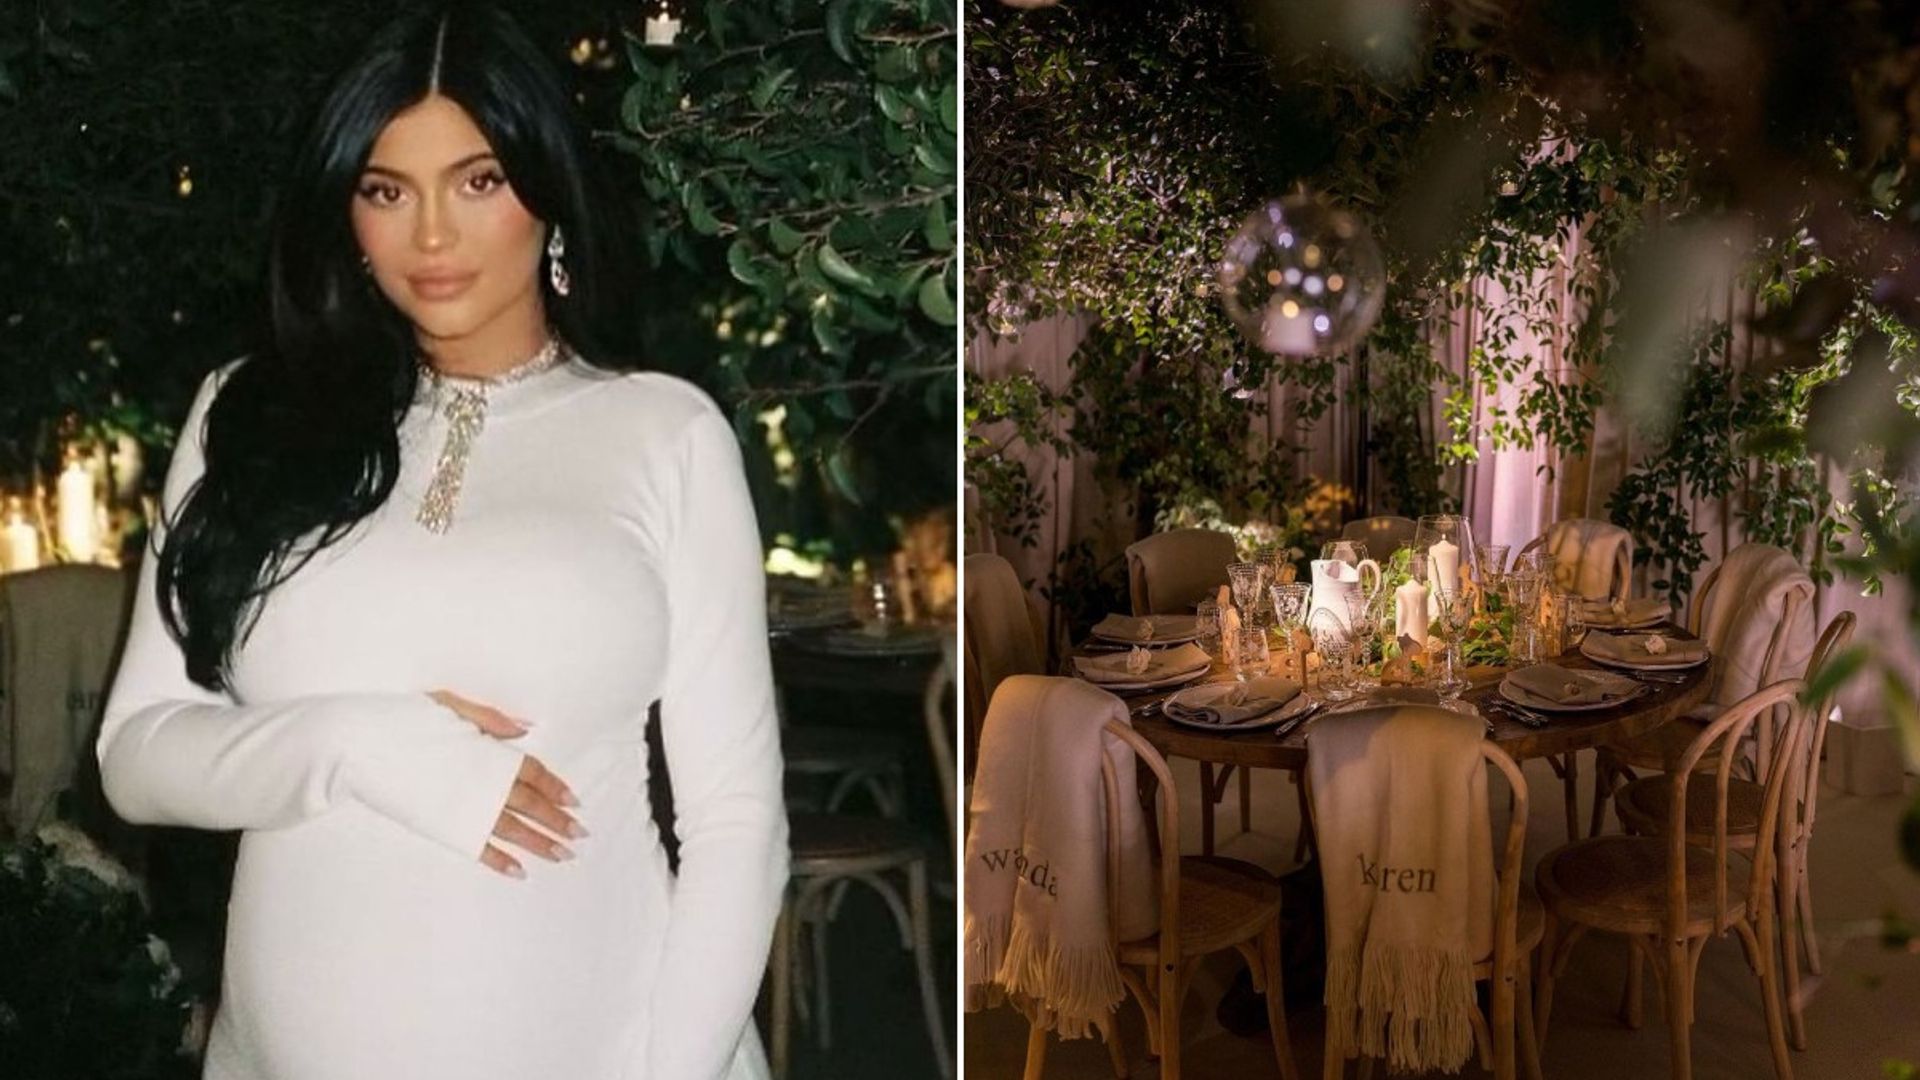 Inside Kylie Jenner's stunning baby shower with personalized blankets and crafts